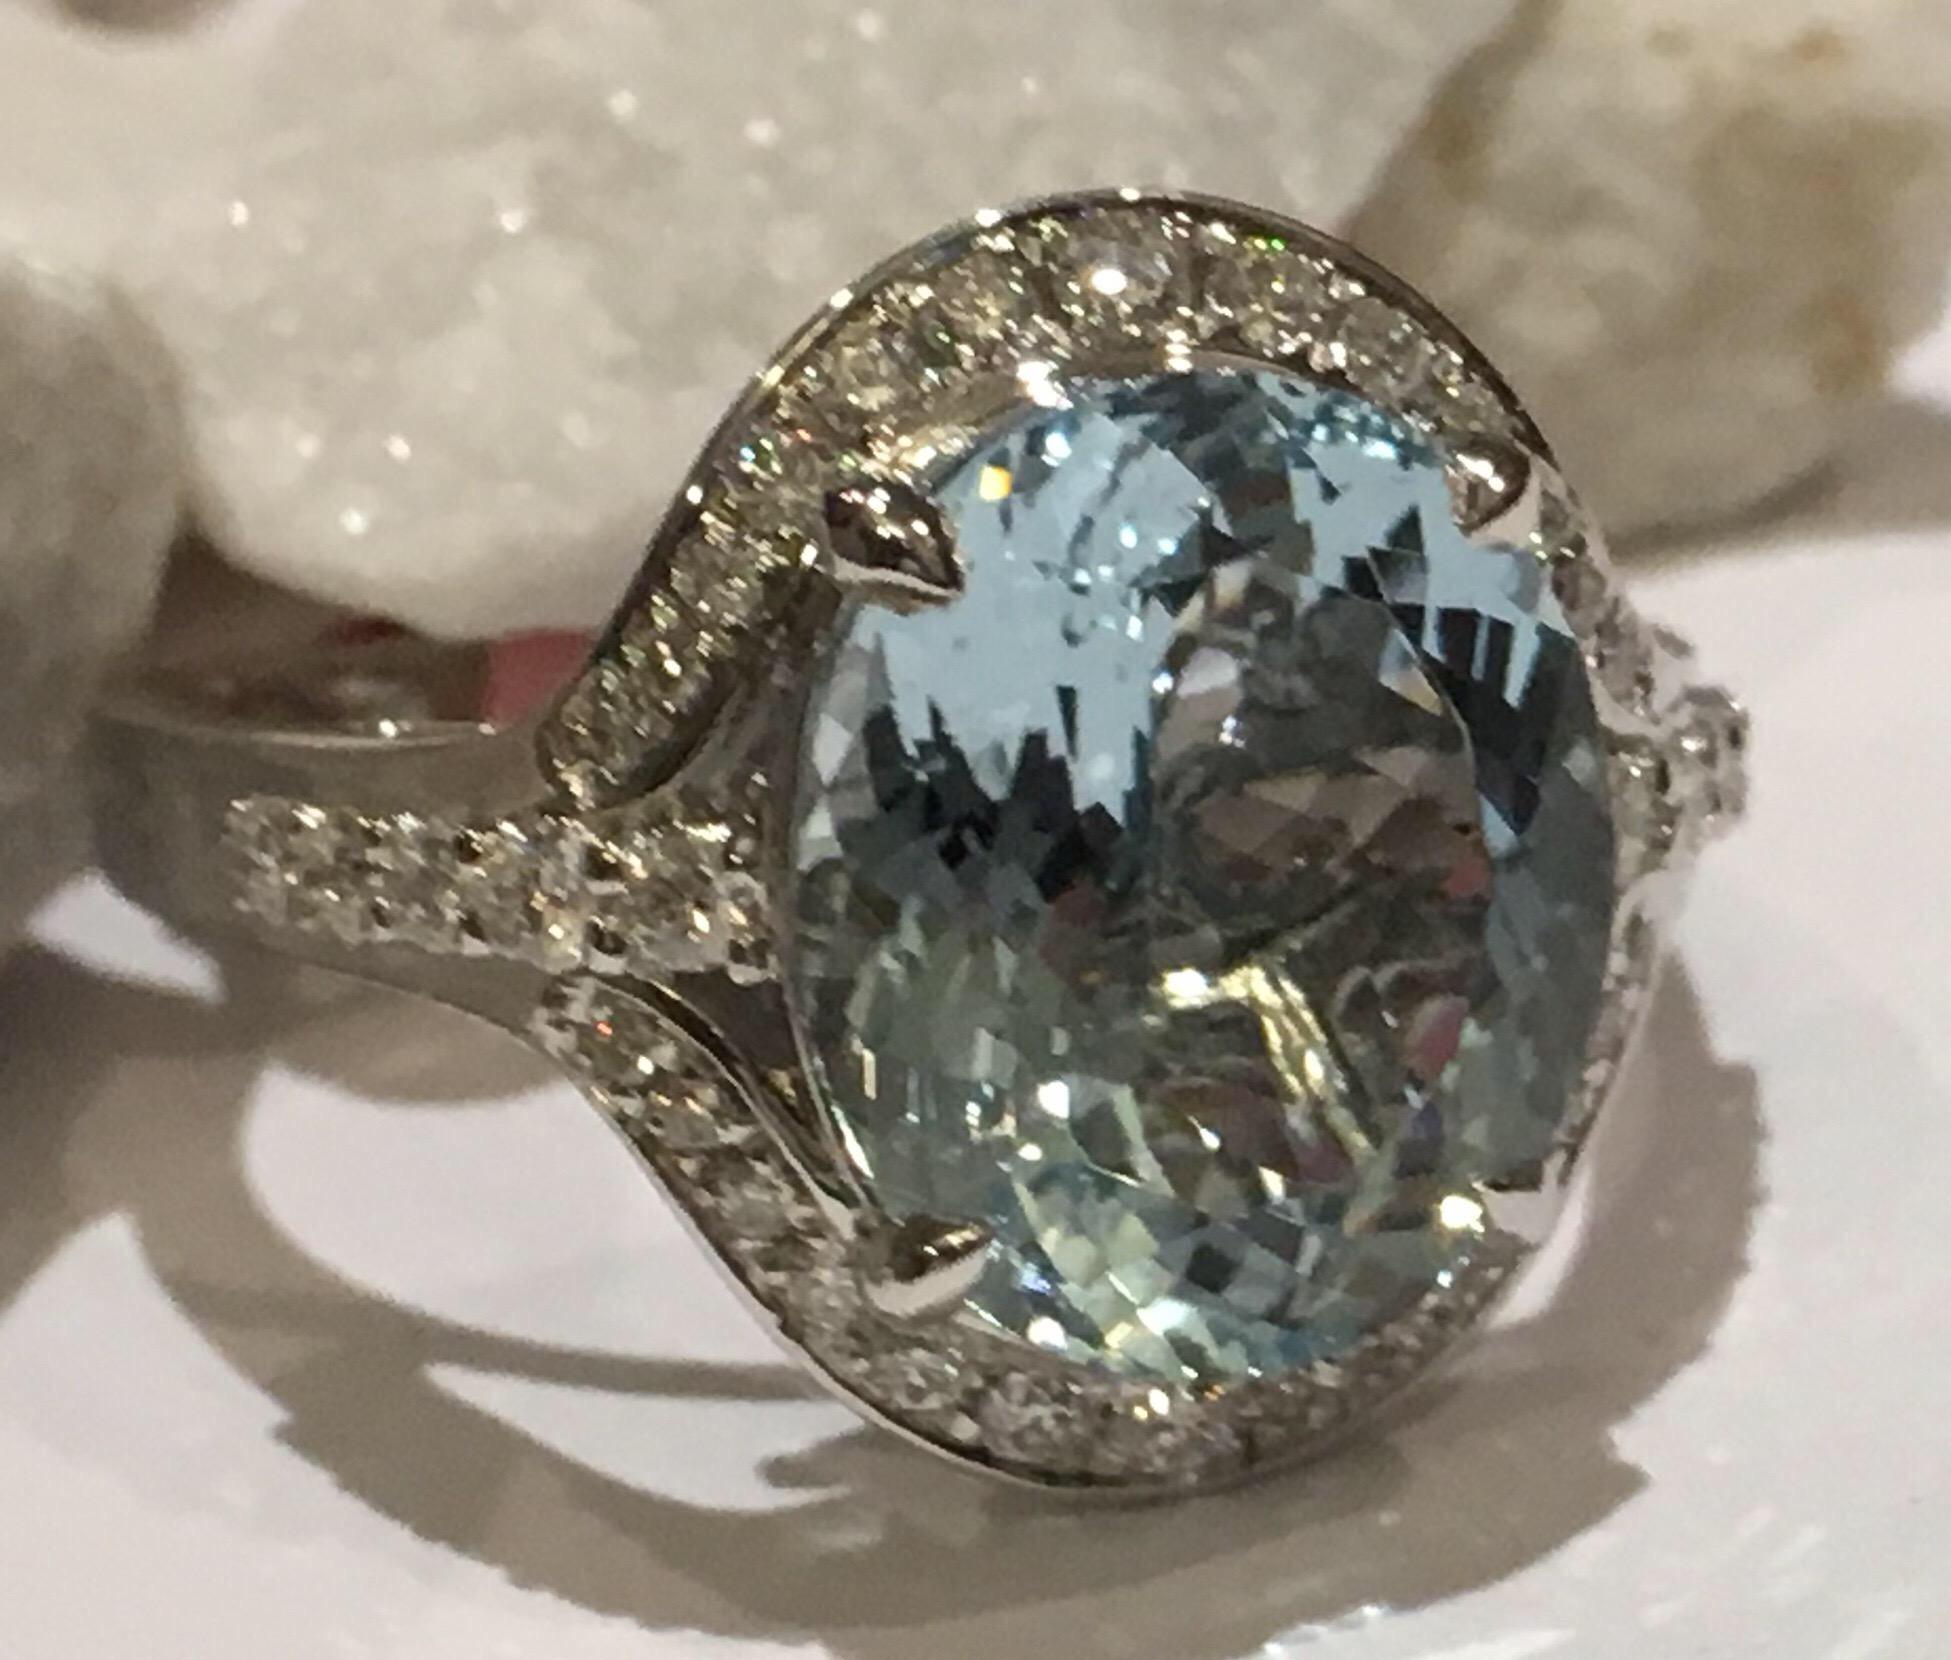 Oval Aquamarine 4.09 Carat and 0.38 Carat Diamonds set in 14K White Gold.
The Ring is size 7 and can be resized if needed.
This is one of a kind hand crafted Ring.